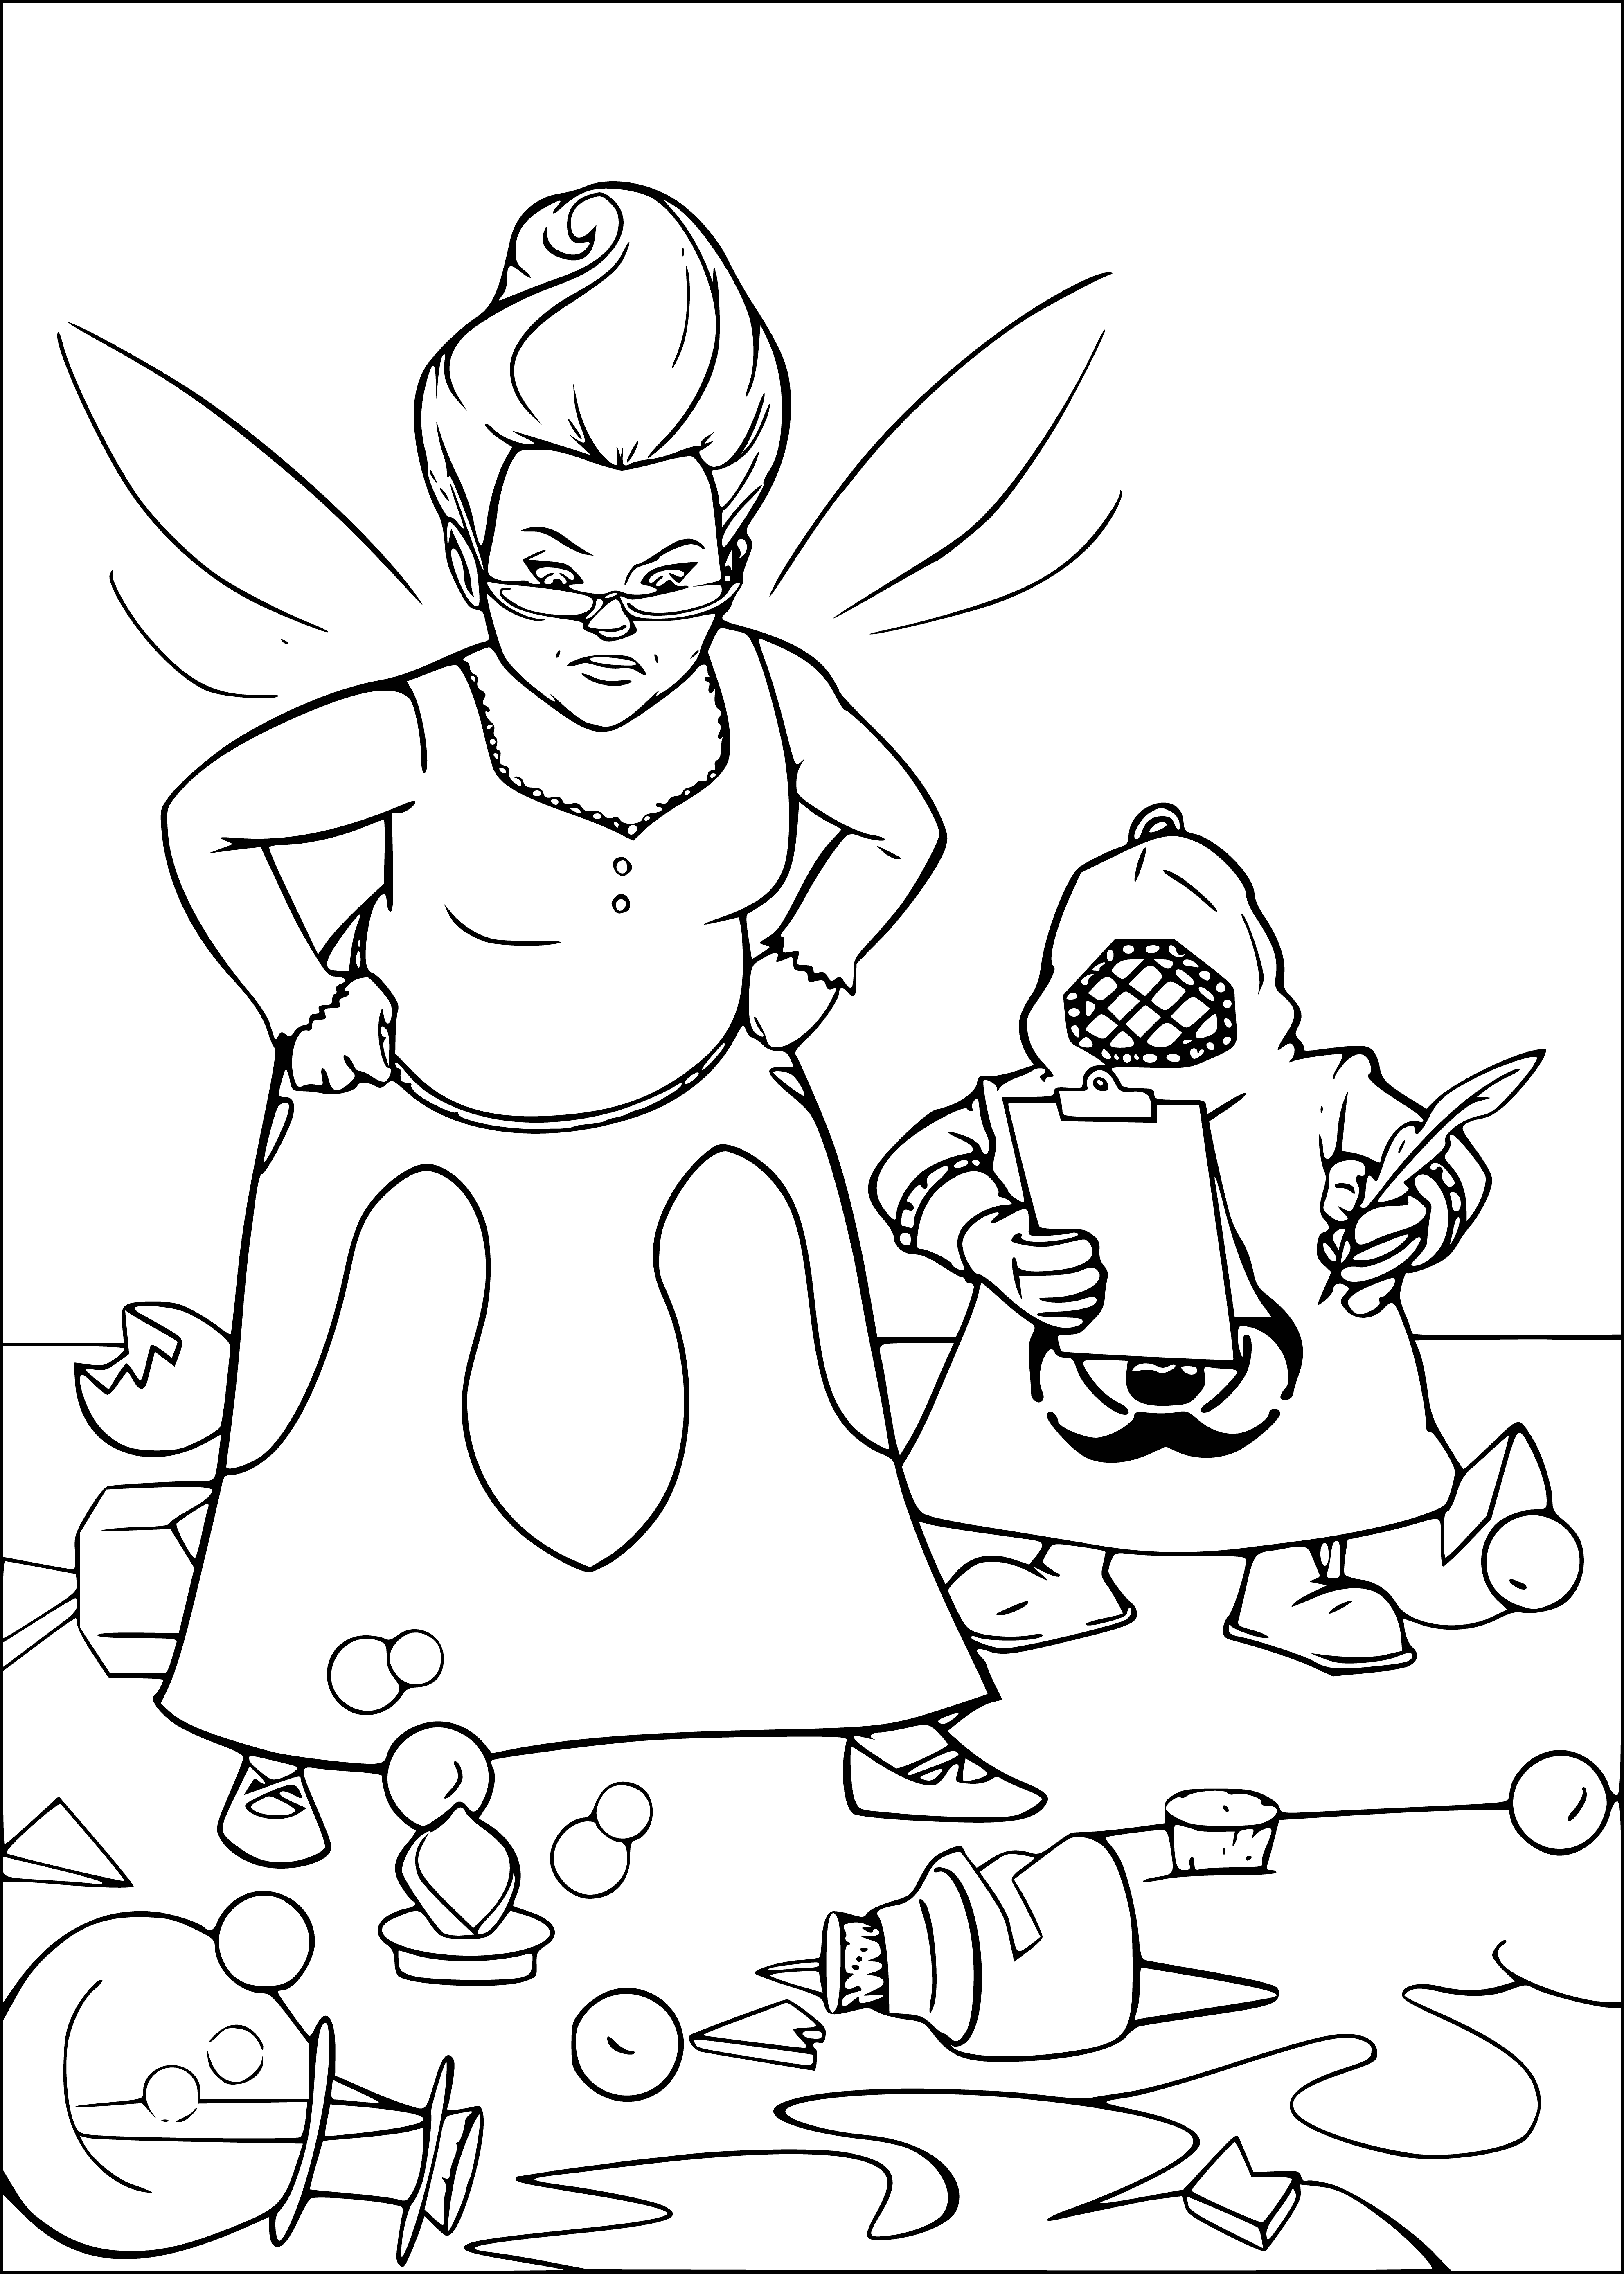 Fairy Godmother coloring page